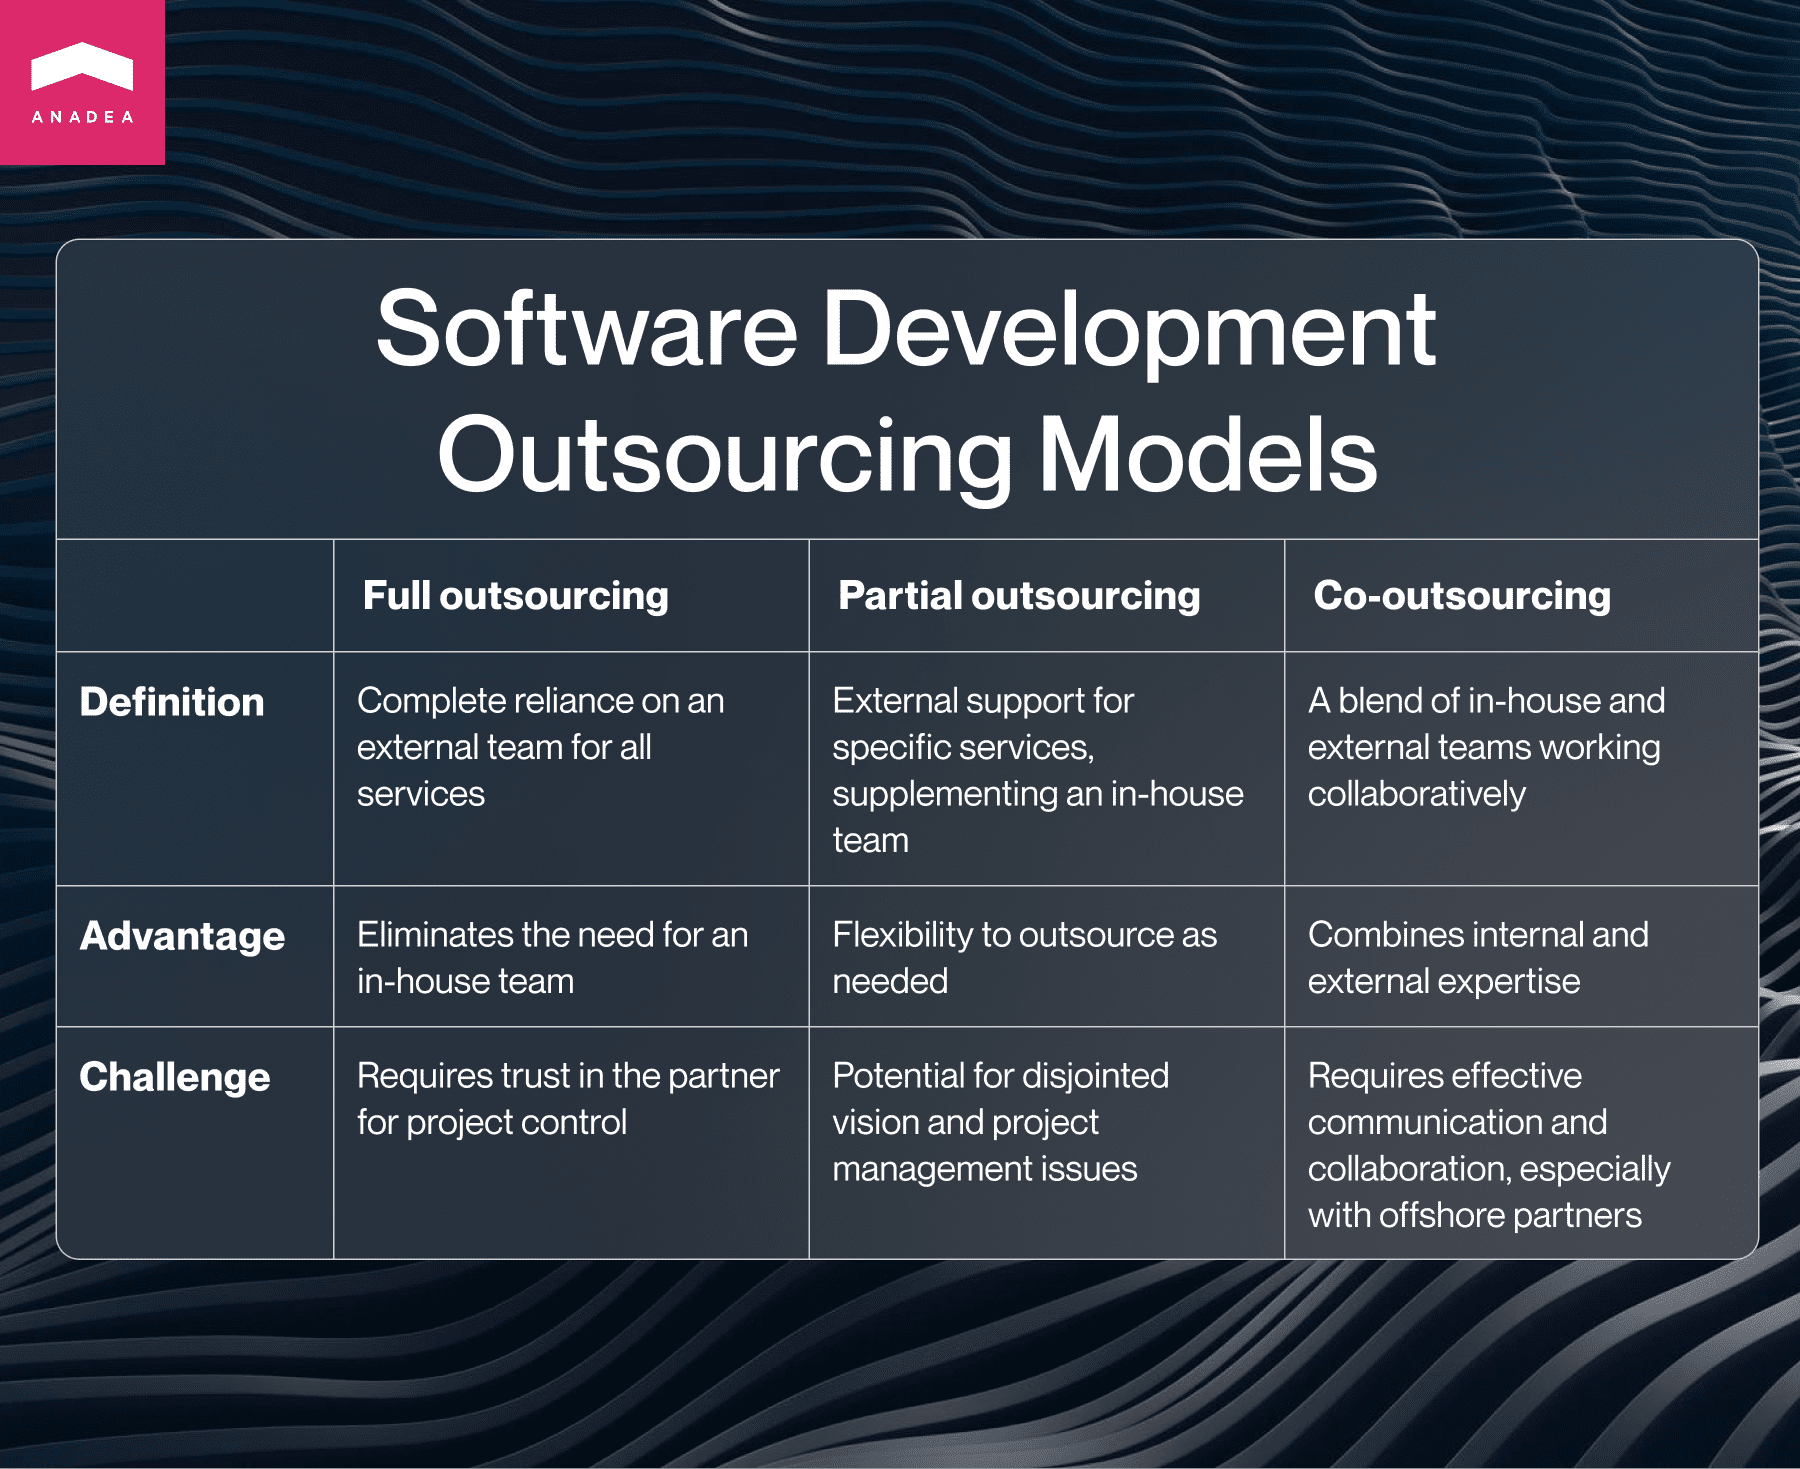 Models of outsourced software development